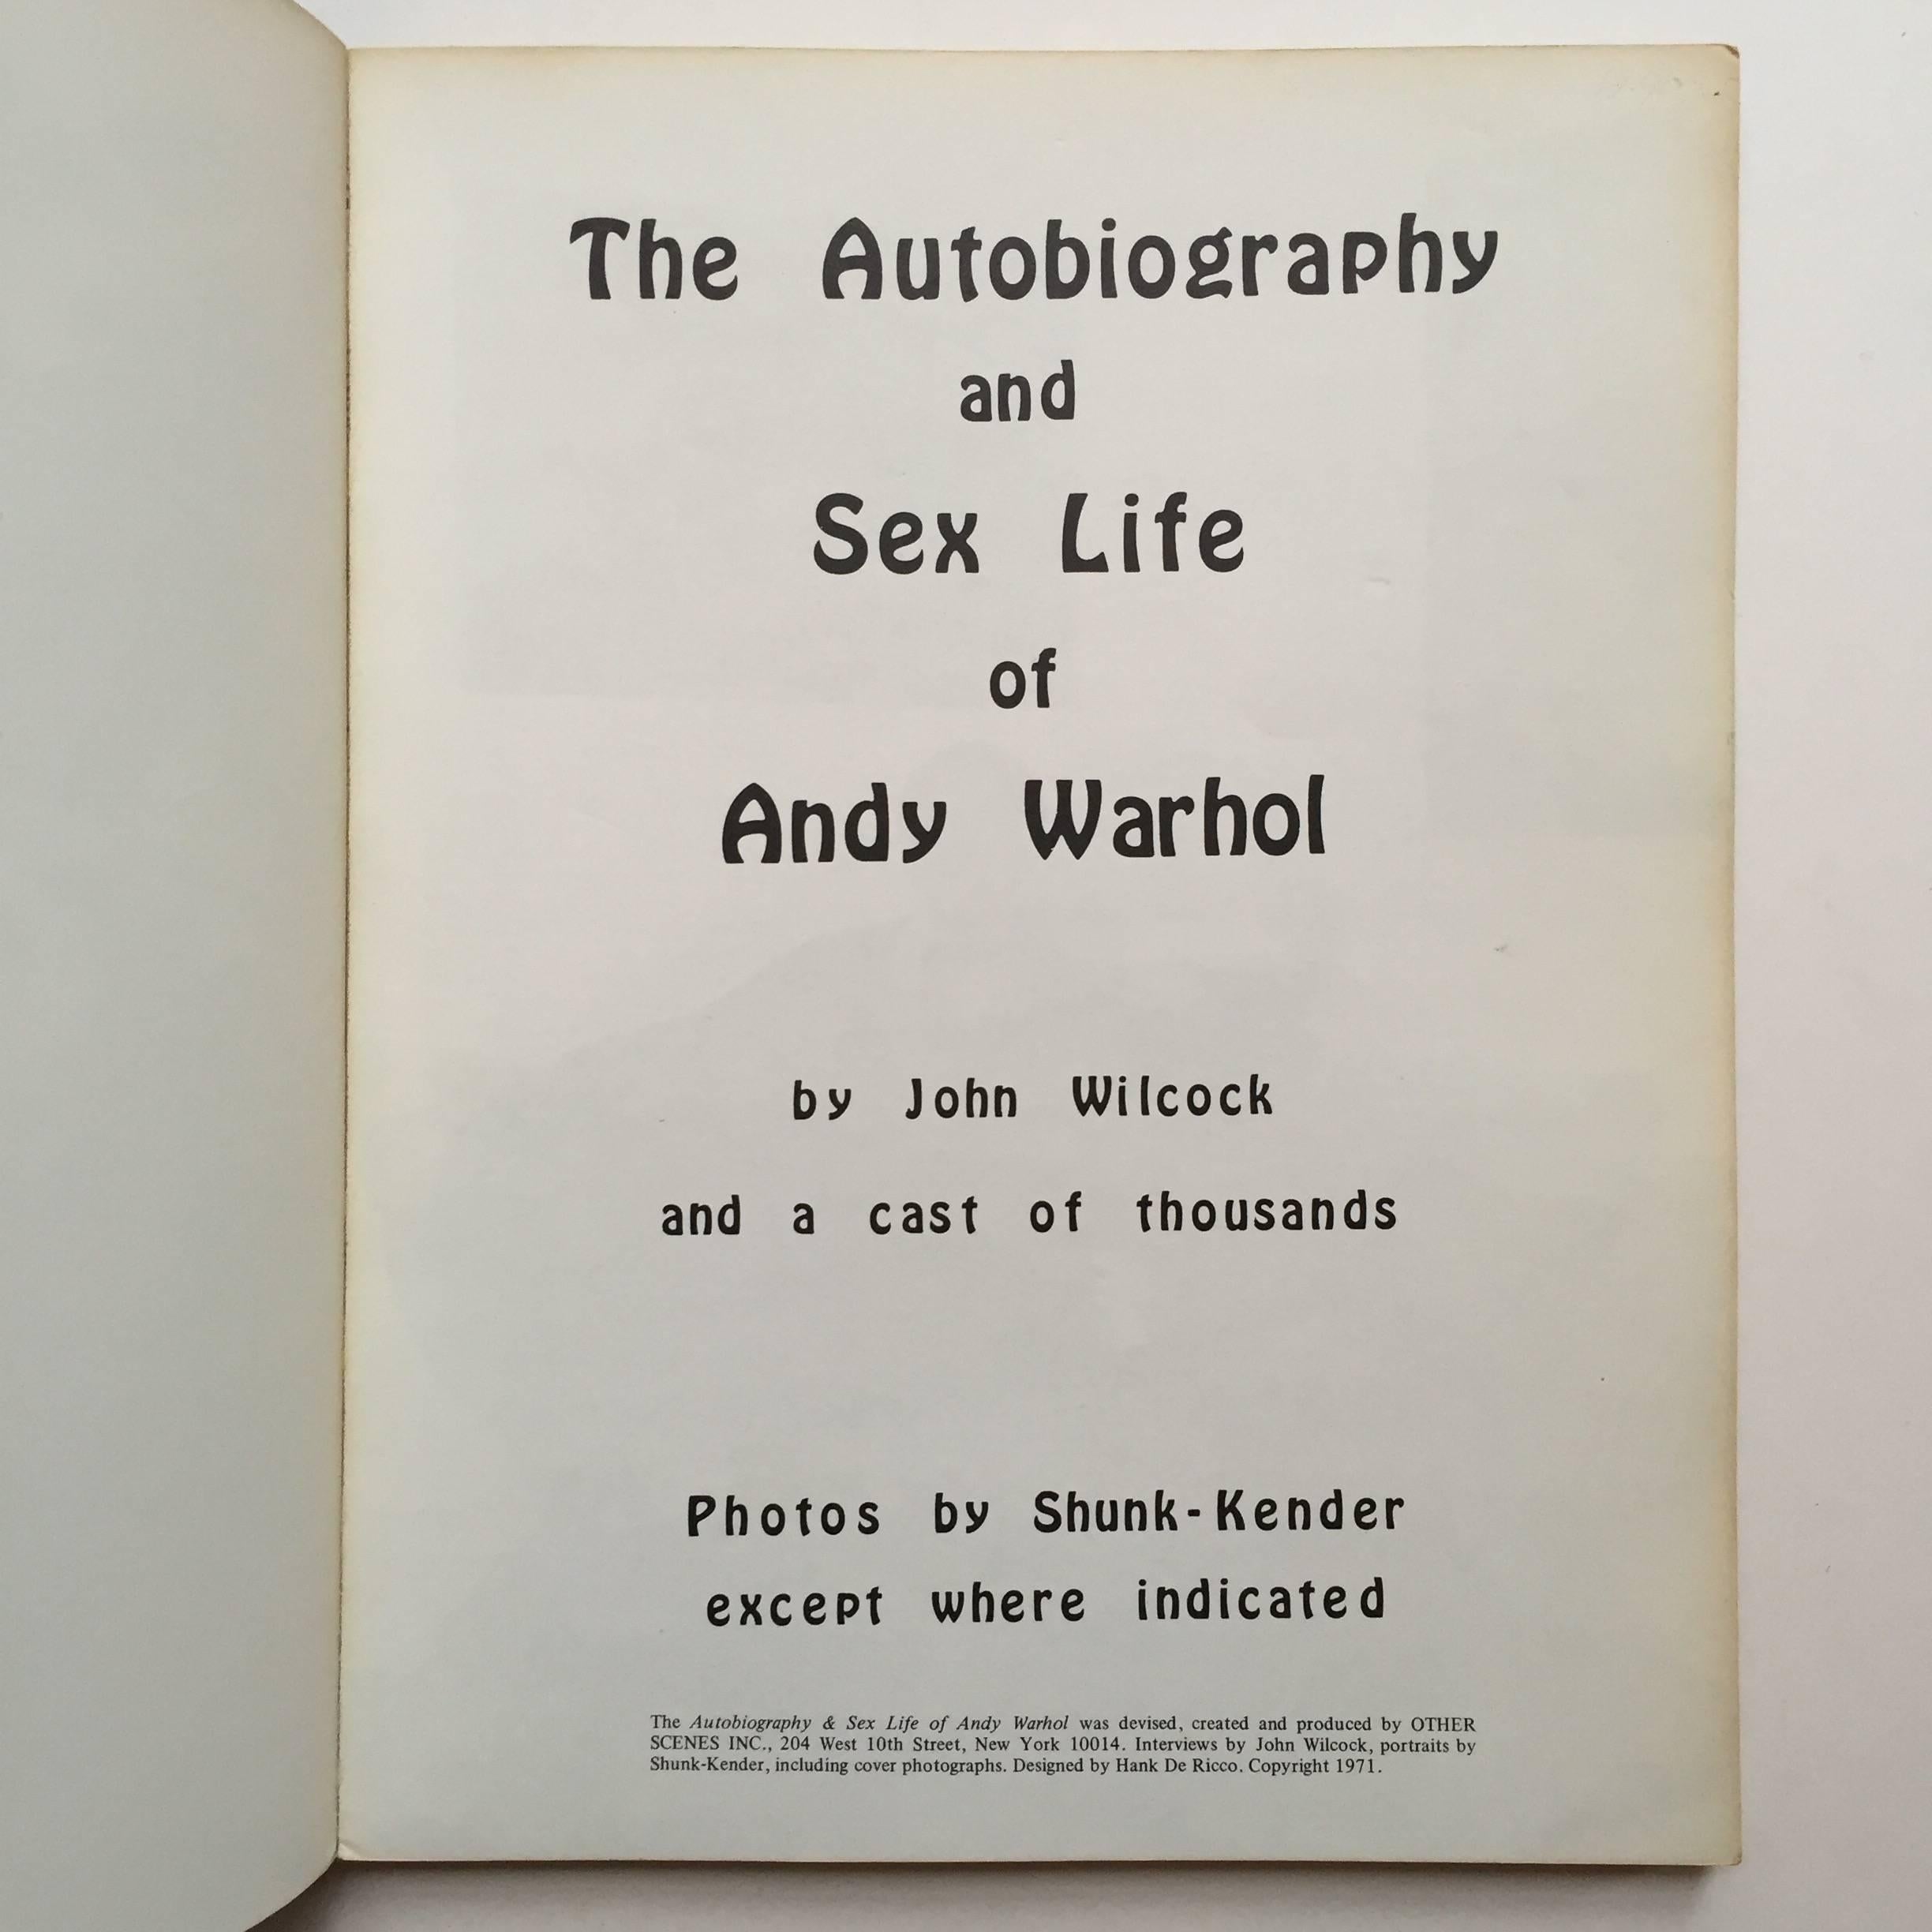 First edition, published by Other Scenes Inc, 1971

The result of six months spent at ‘the Factory’, British writer John Wilcock sets about interviewing many of the key figures in Warhol’s life, including the likes of Naomi Levine, Ultra Violet,